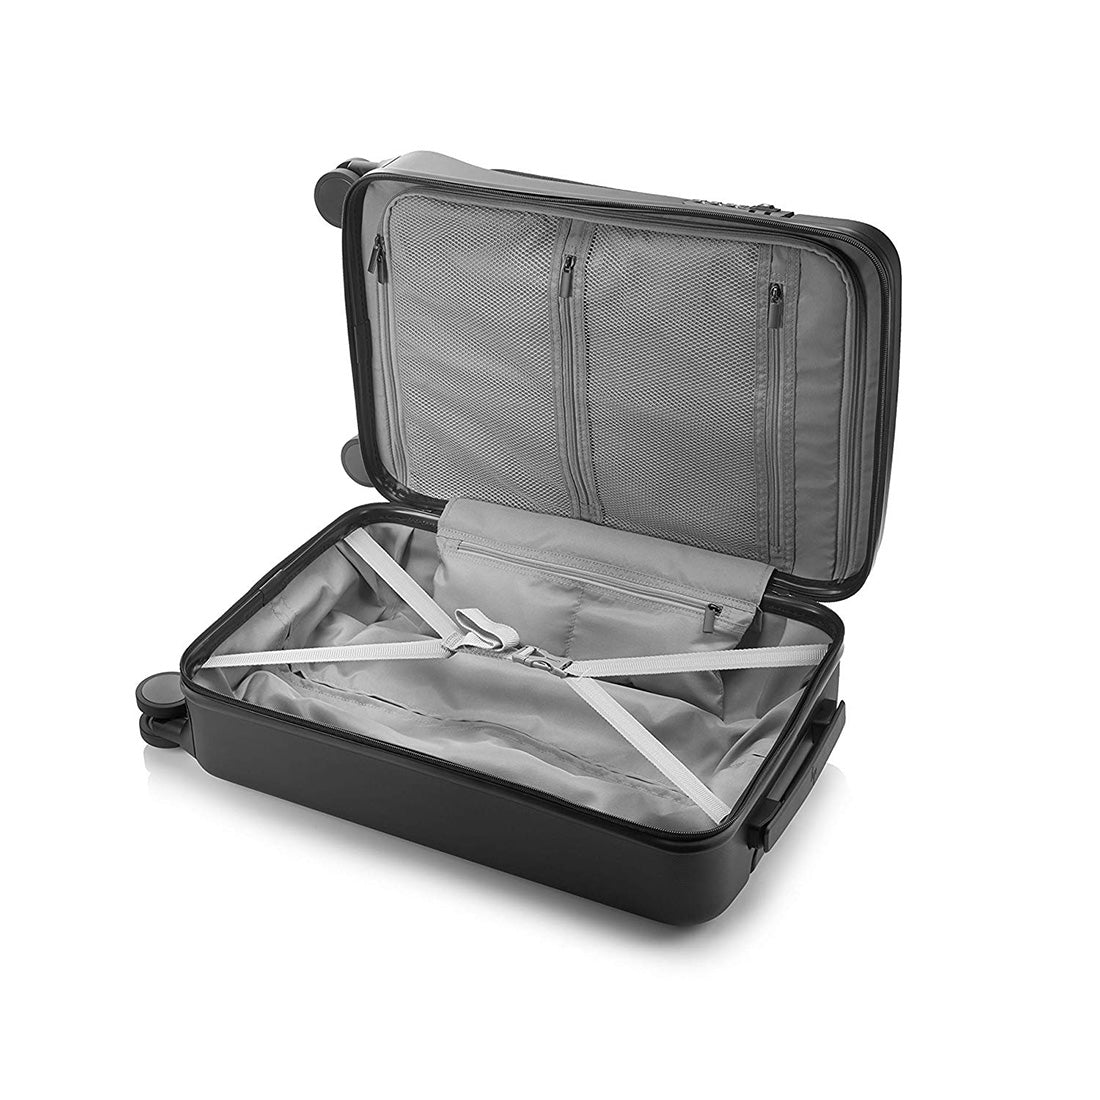 HP 20-inch Hard Case Luggage with 15.6-inch laptop compartment